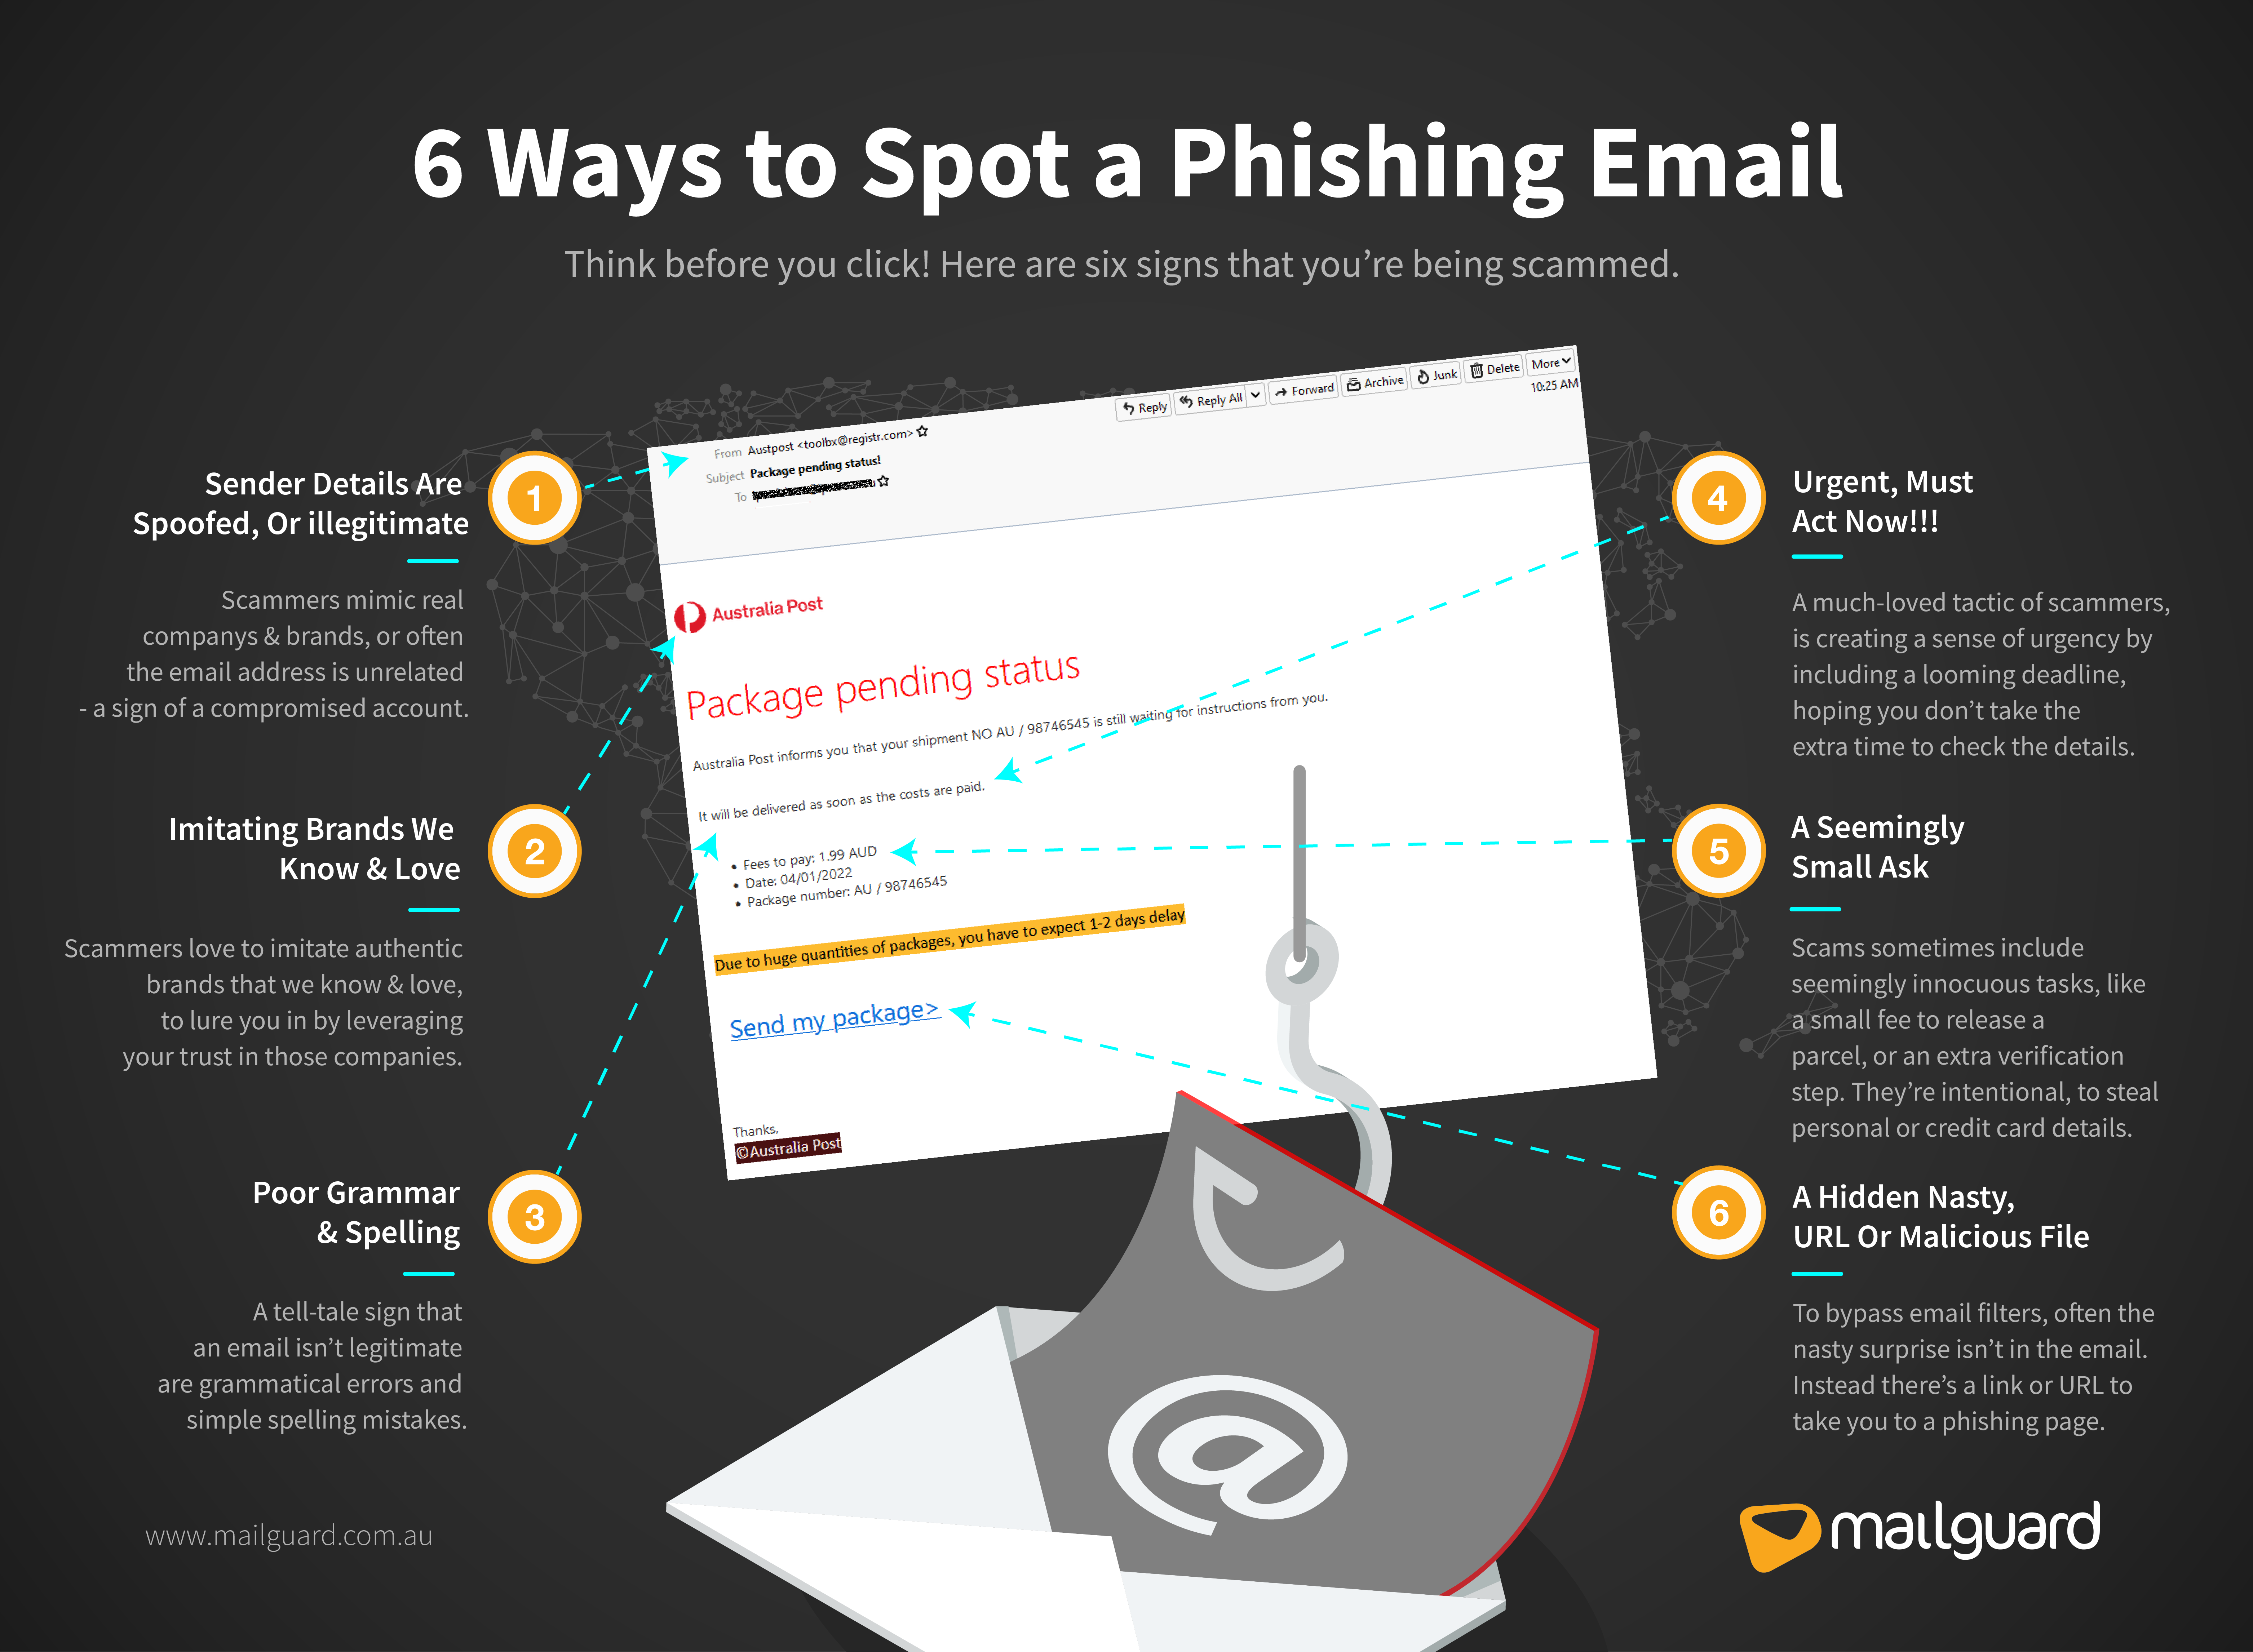 6 ways to spot a phishing email